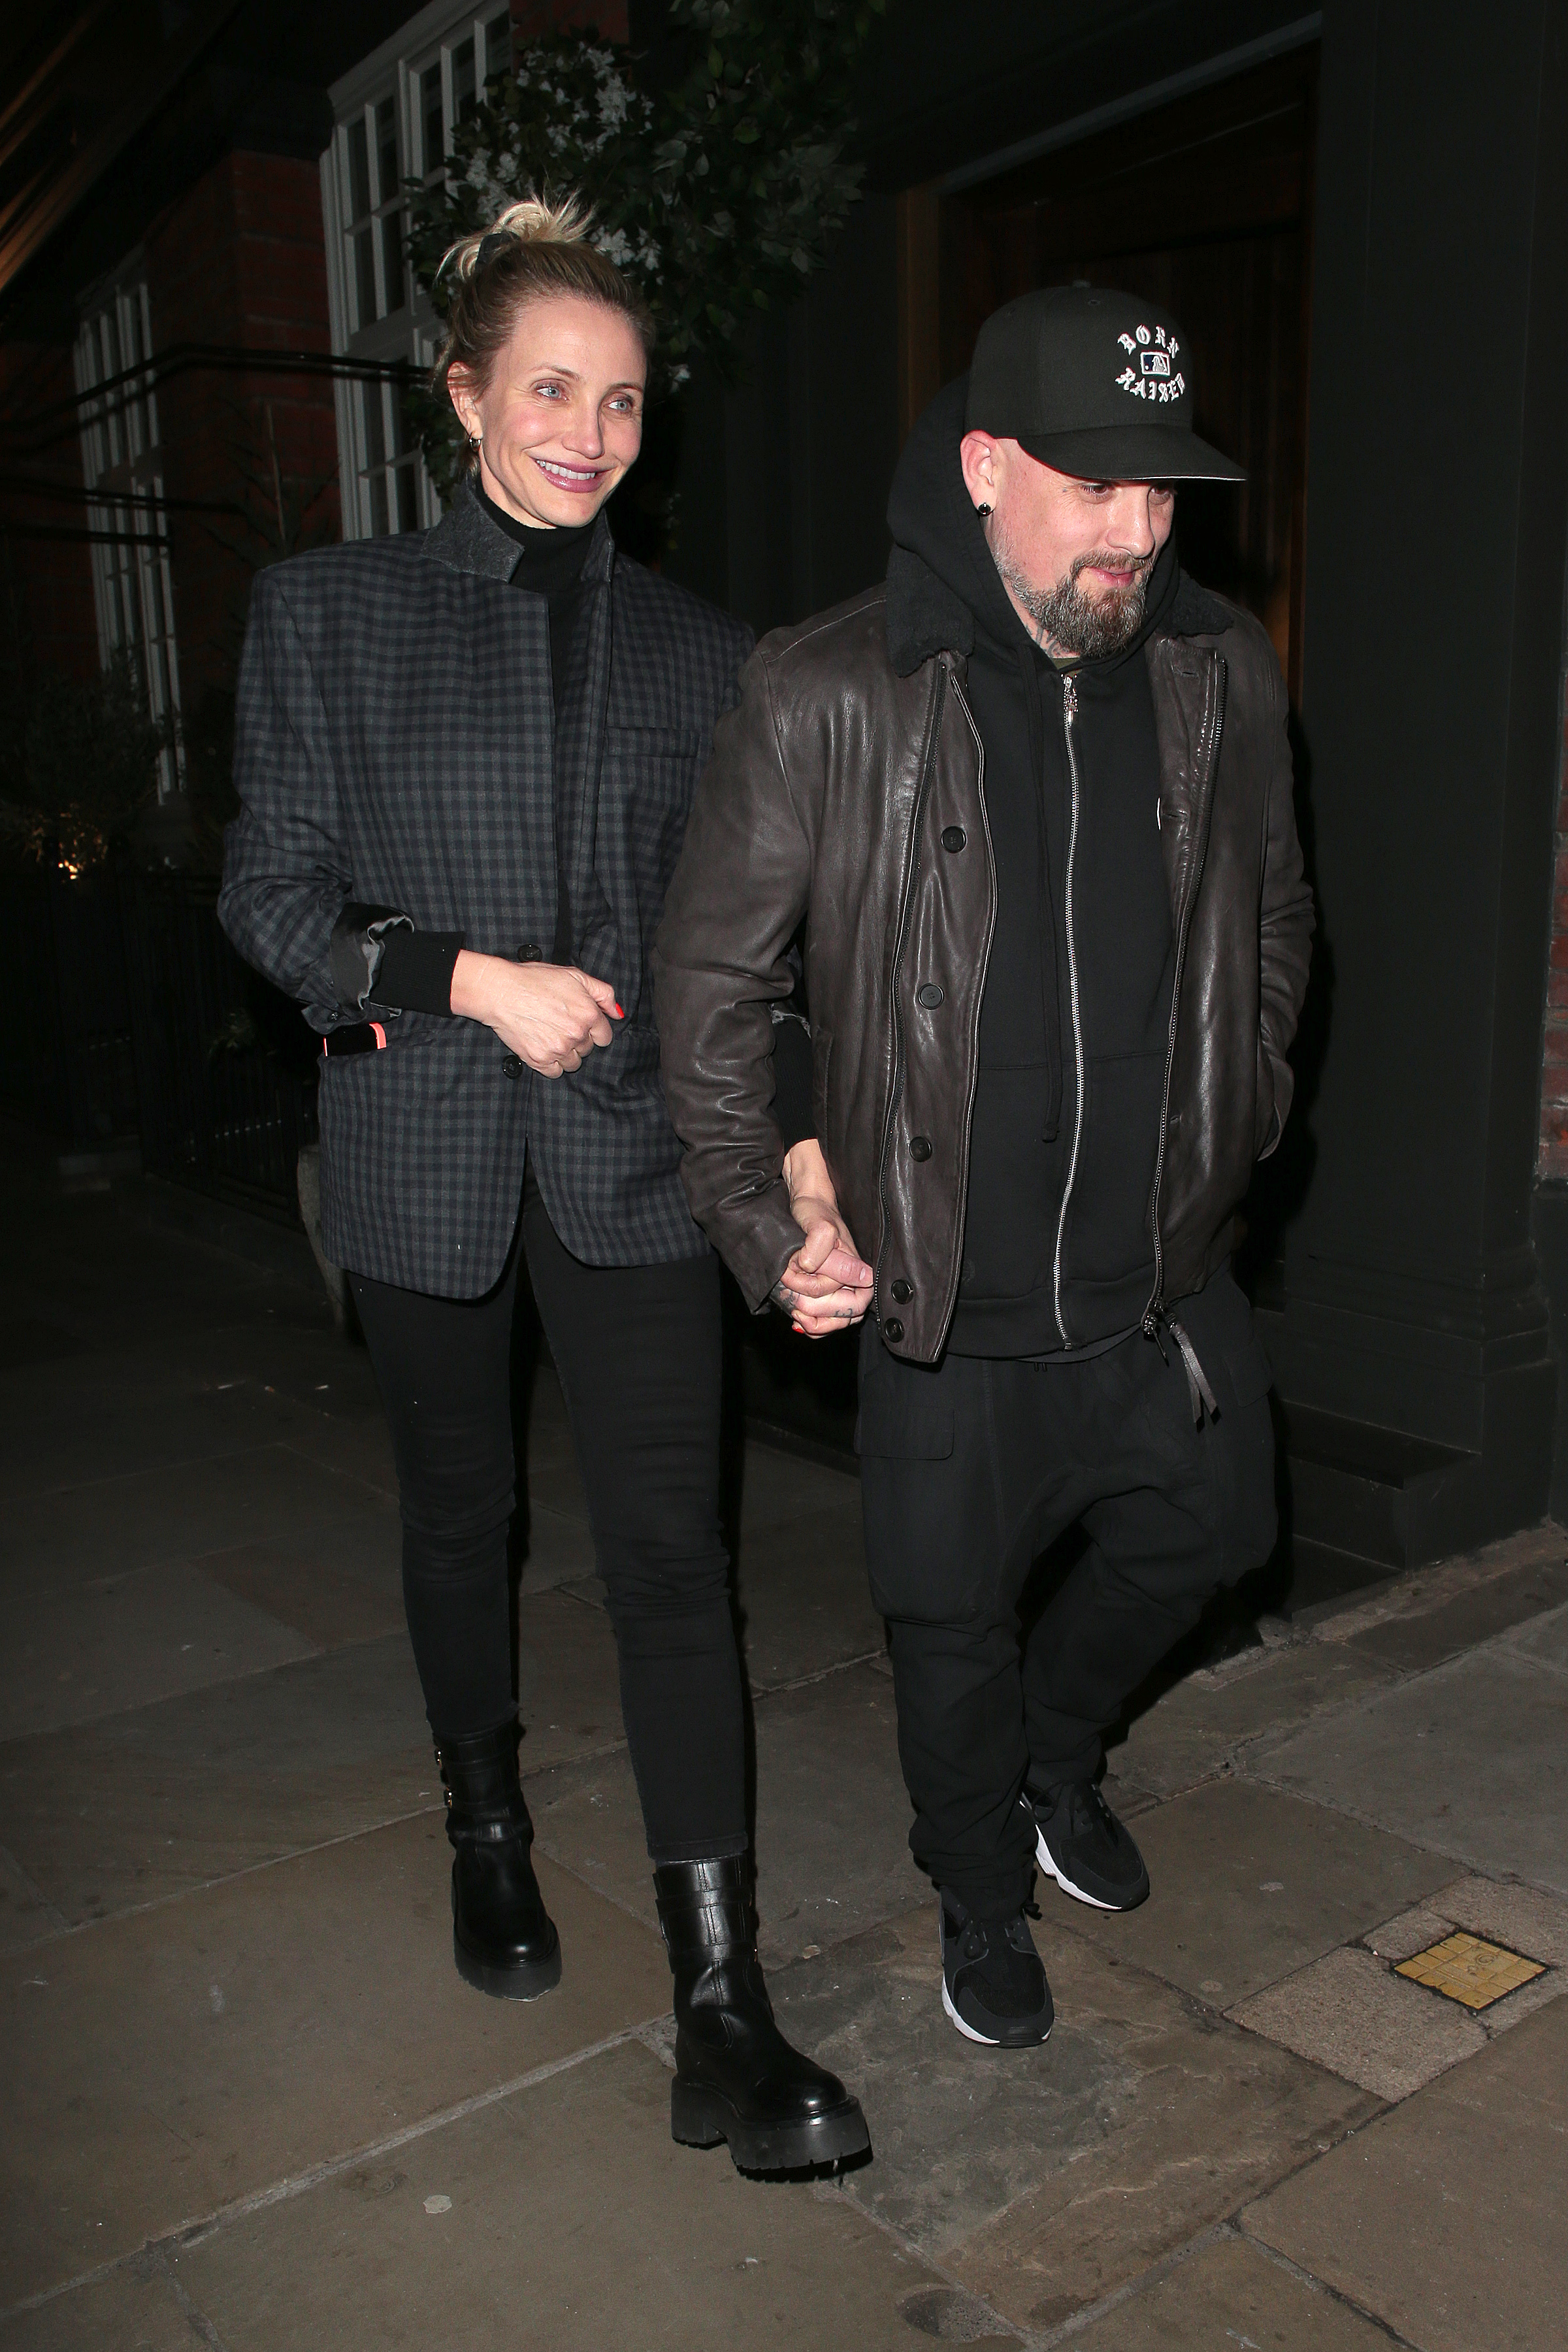 Cameron Diaz and Benji Madden at Sparrow Italia - Mayfair London restaurant on December 02, 2022 | Source: Getty Images